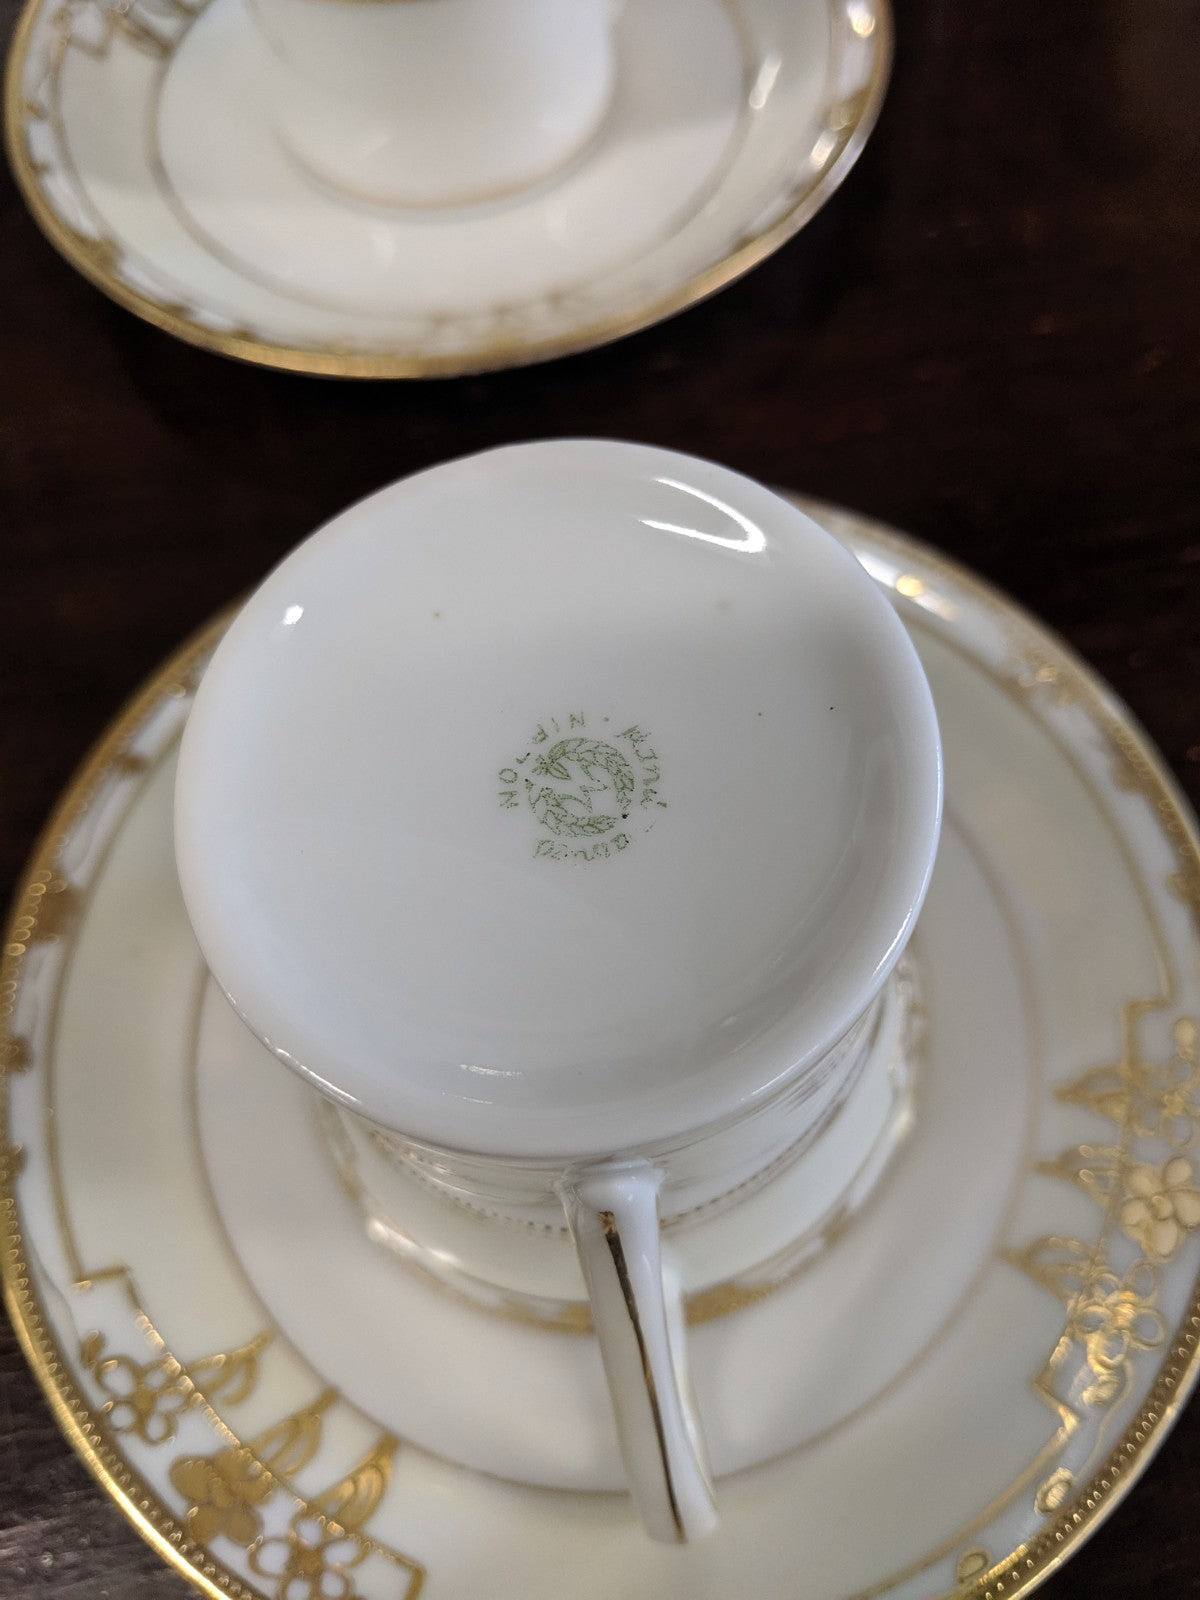 Set of 4 antique Nippon china tea cups with saucers